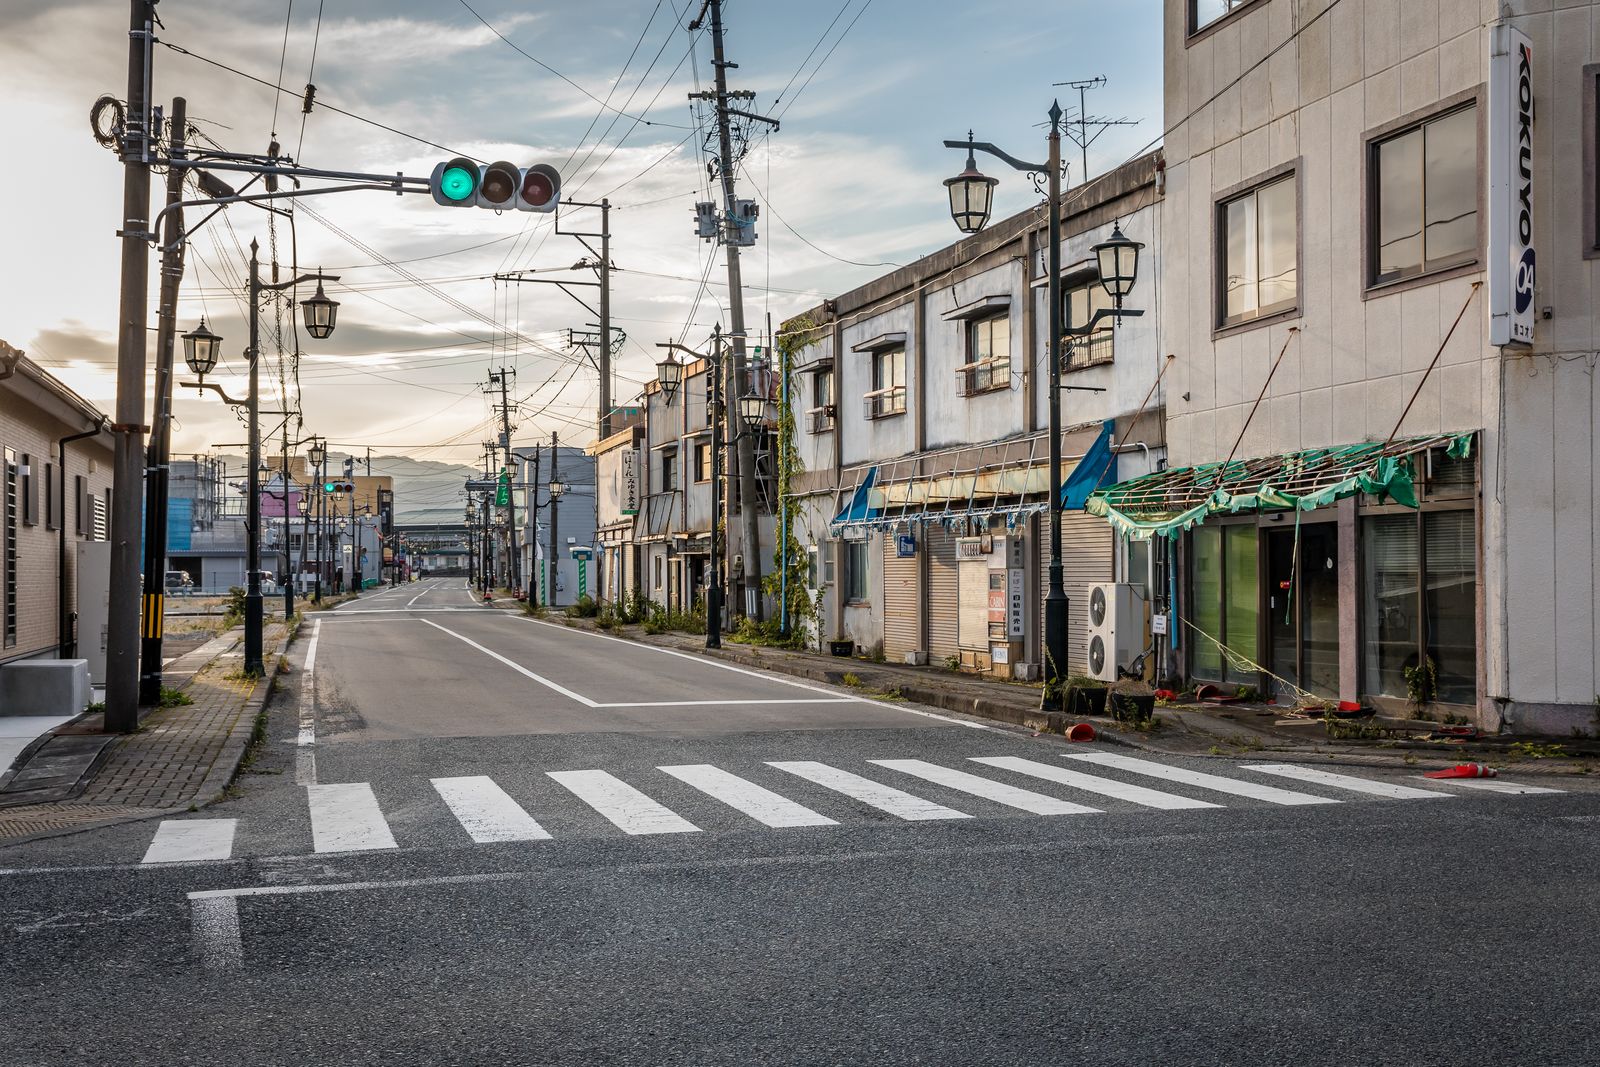 © David Verberckt - Image from the Fukushima, Point of No Return photography project